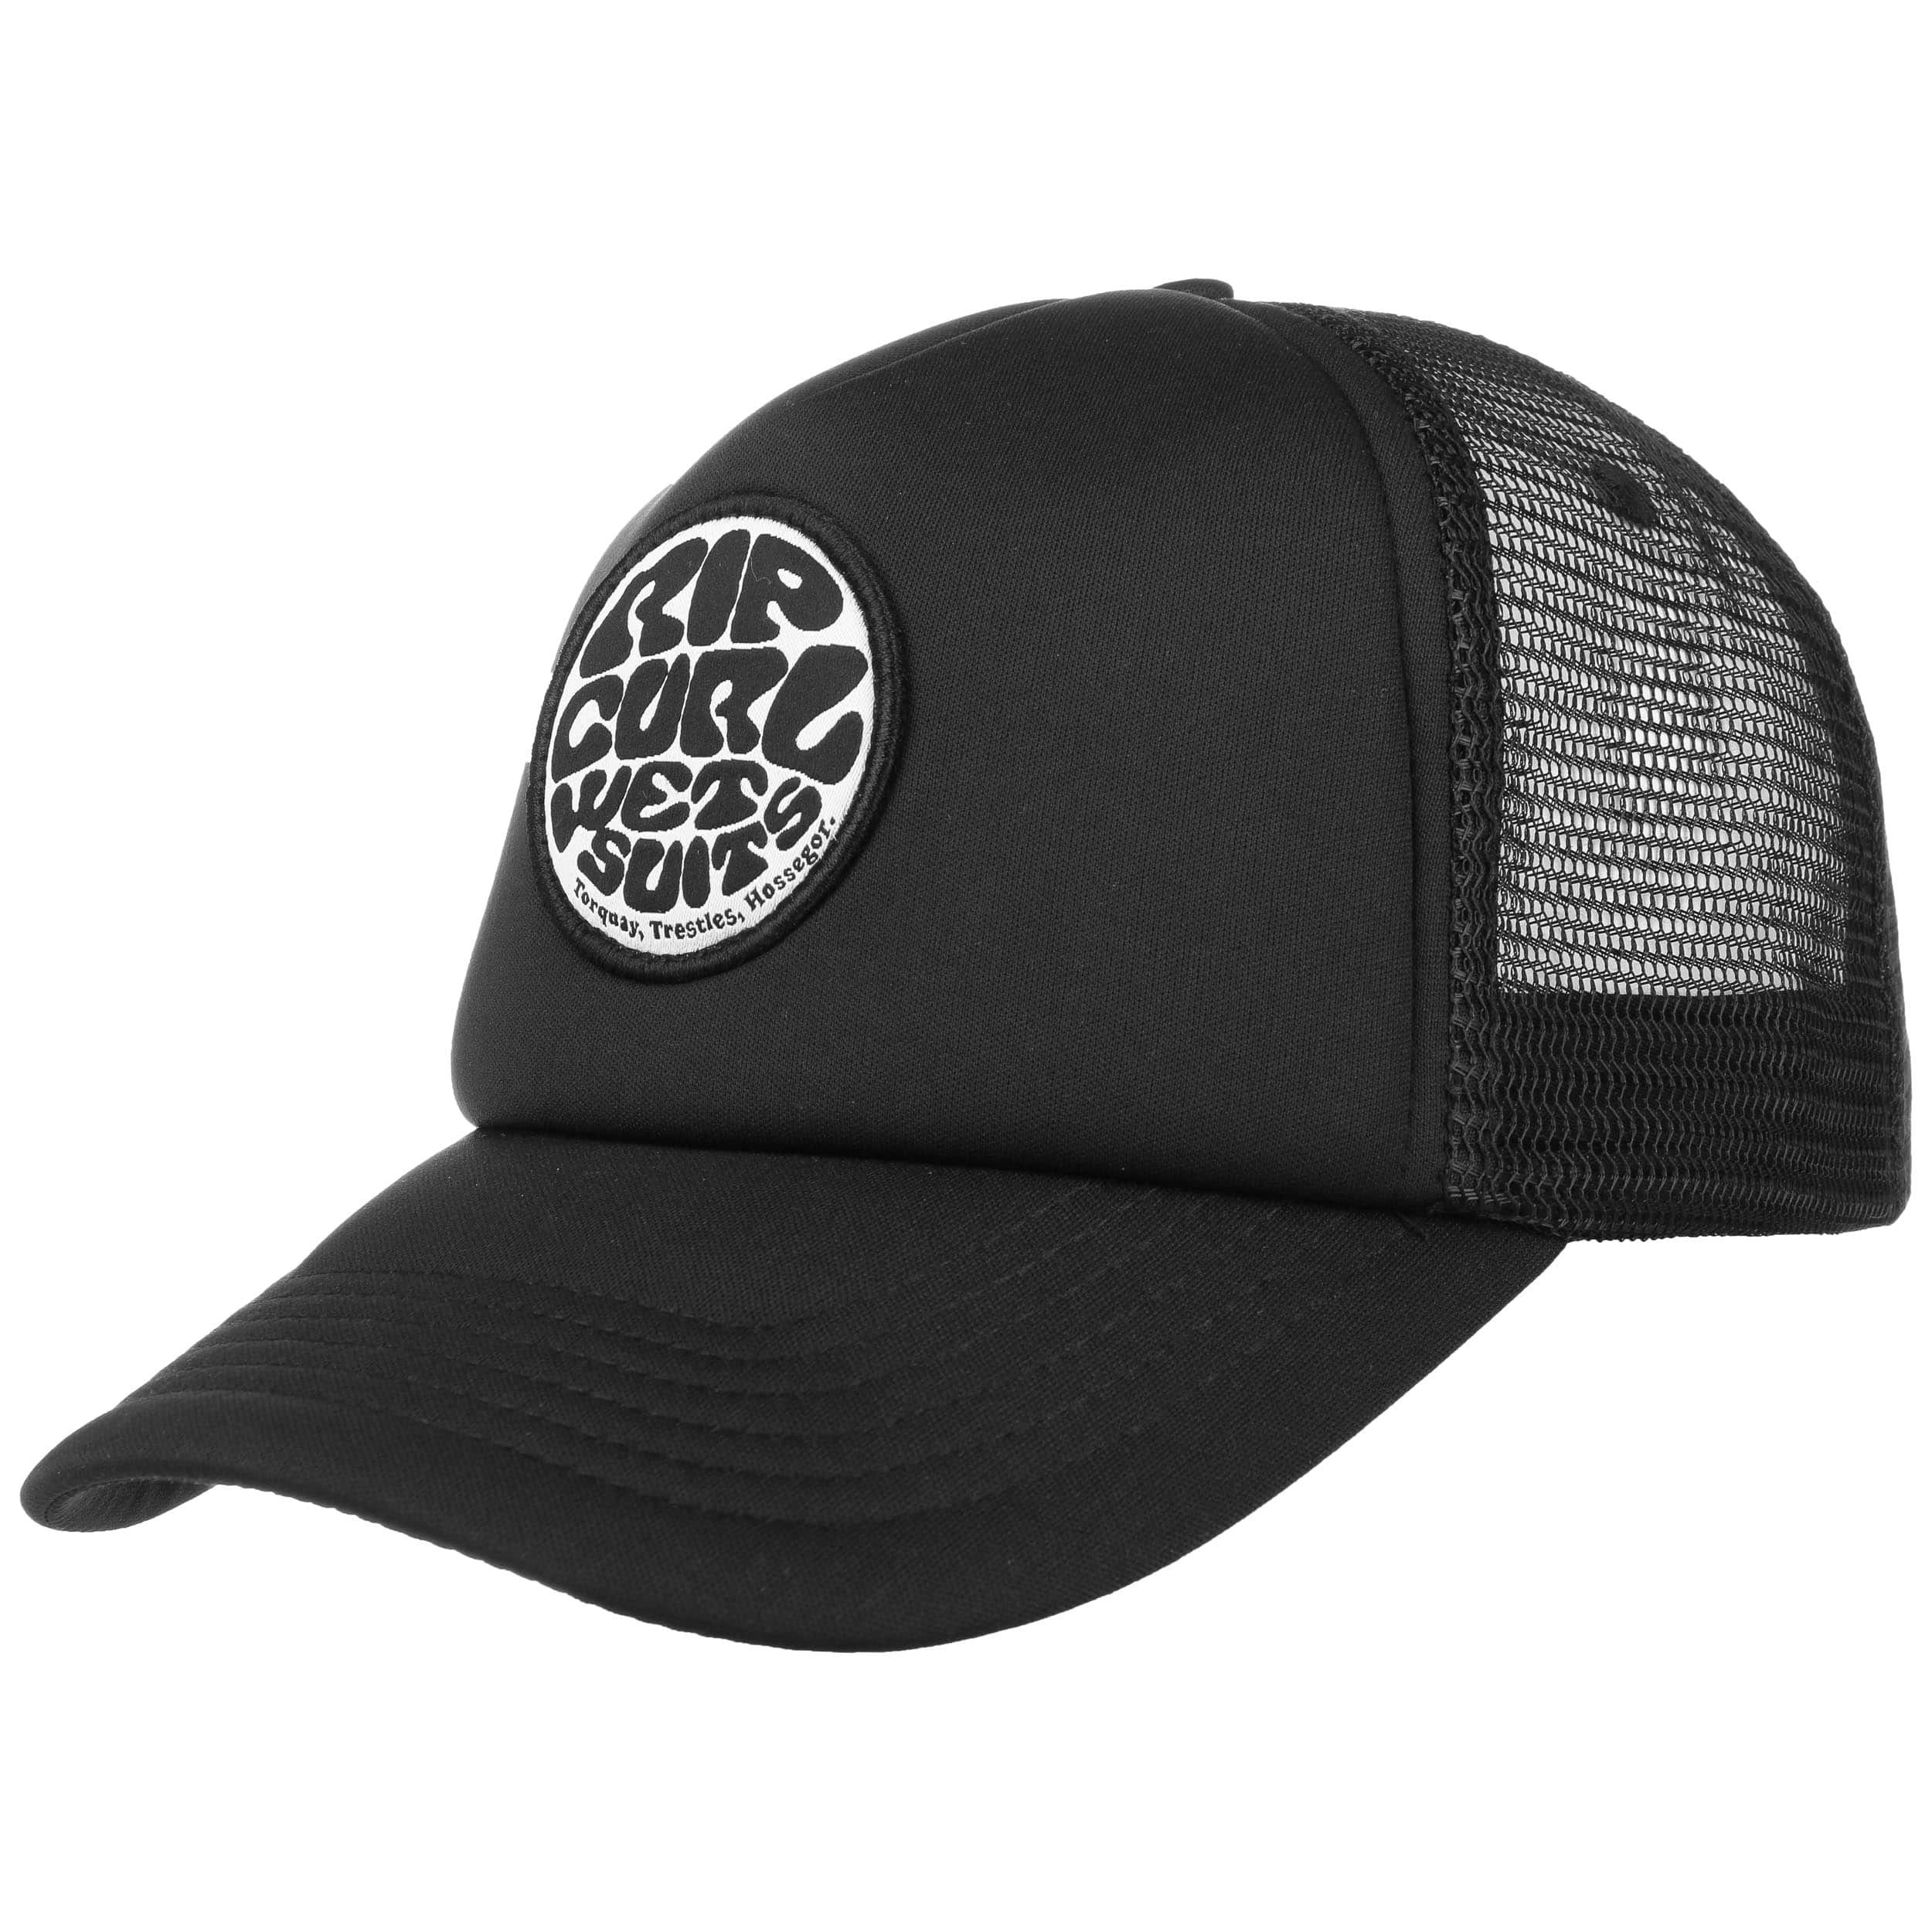 Wetty Curved Trucker Cap by Rip Curl - 22,95 £